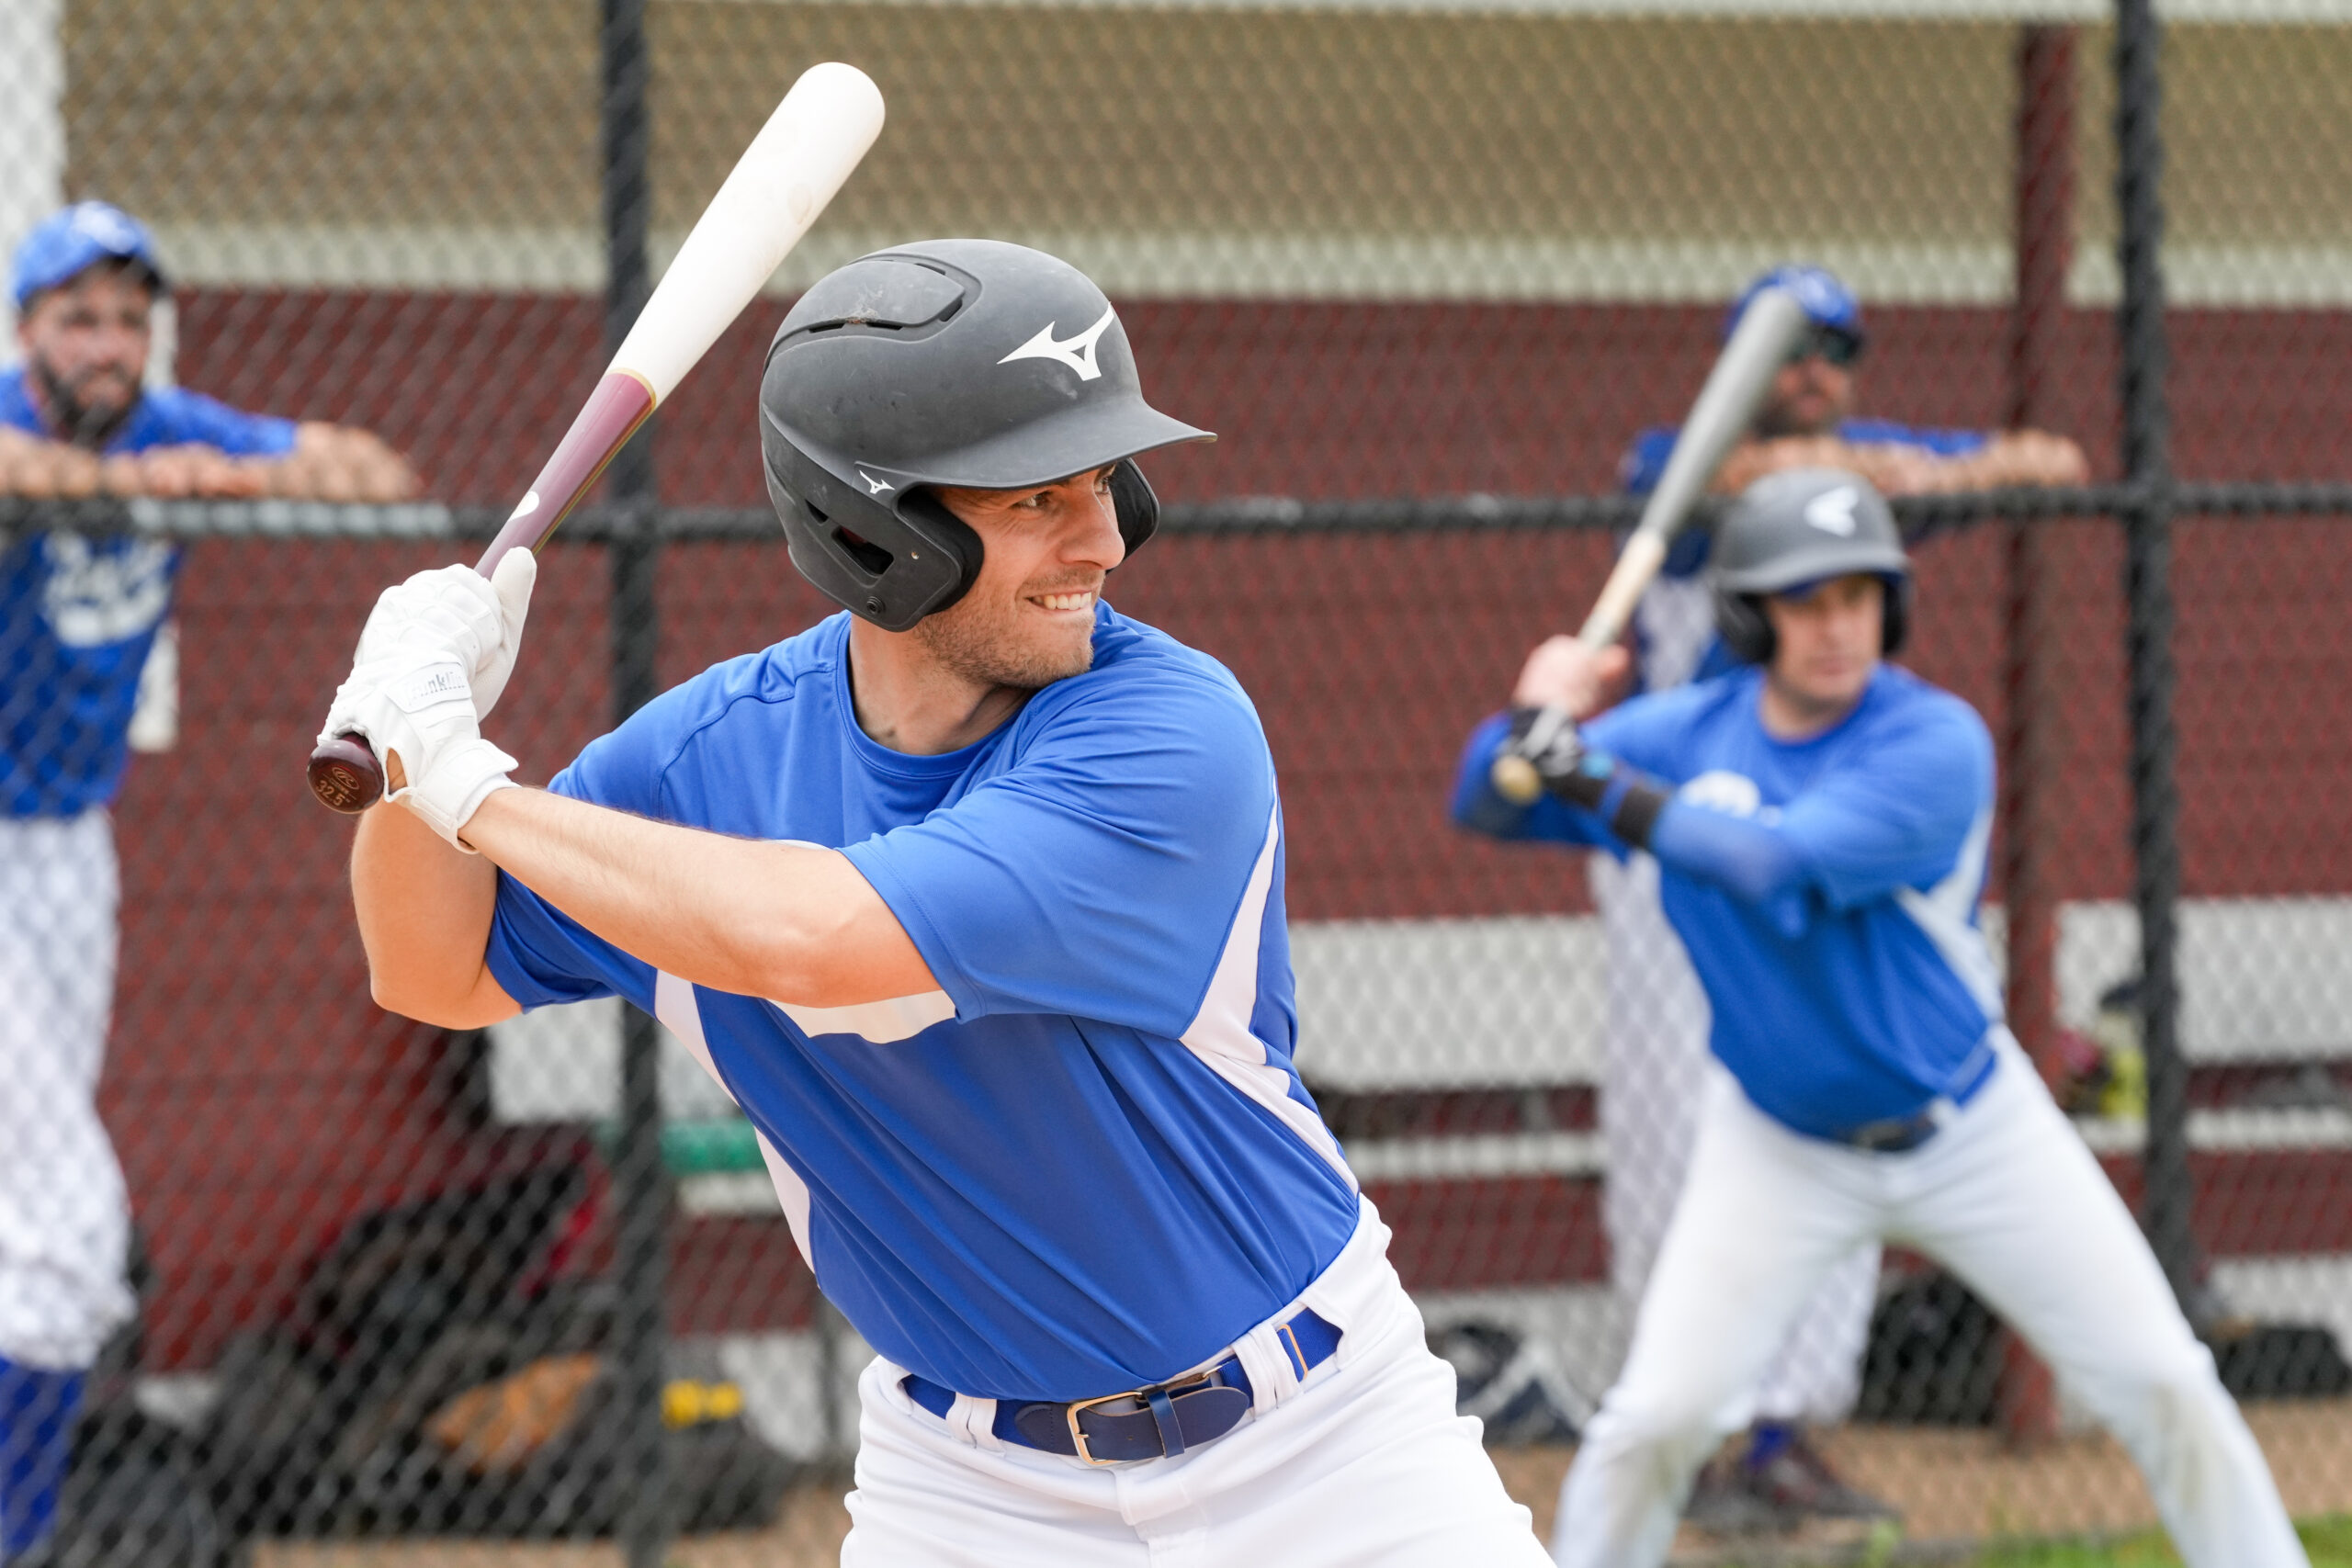 Hamptons Adult Hardball, a 30-and-over wood bat league based on the East End, opened its season on Sunday with a doubleheader of its four teams including the Harbor Kraken against the Southampton Brewers and the Sag Harbor Royals against the East End Ospreys.   RON ESPOSITO